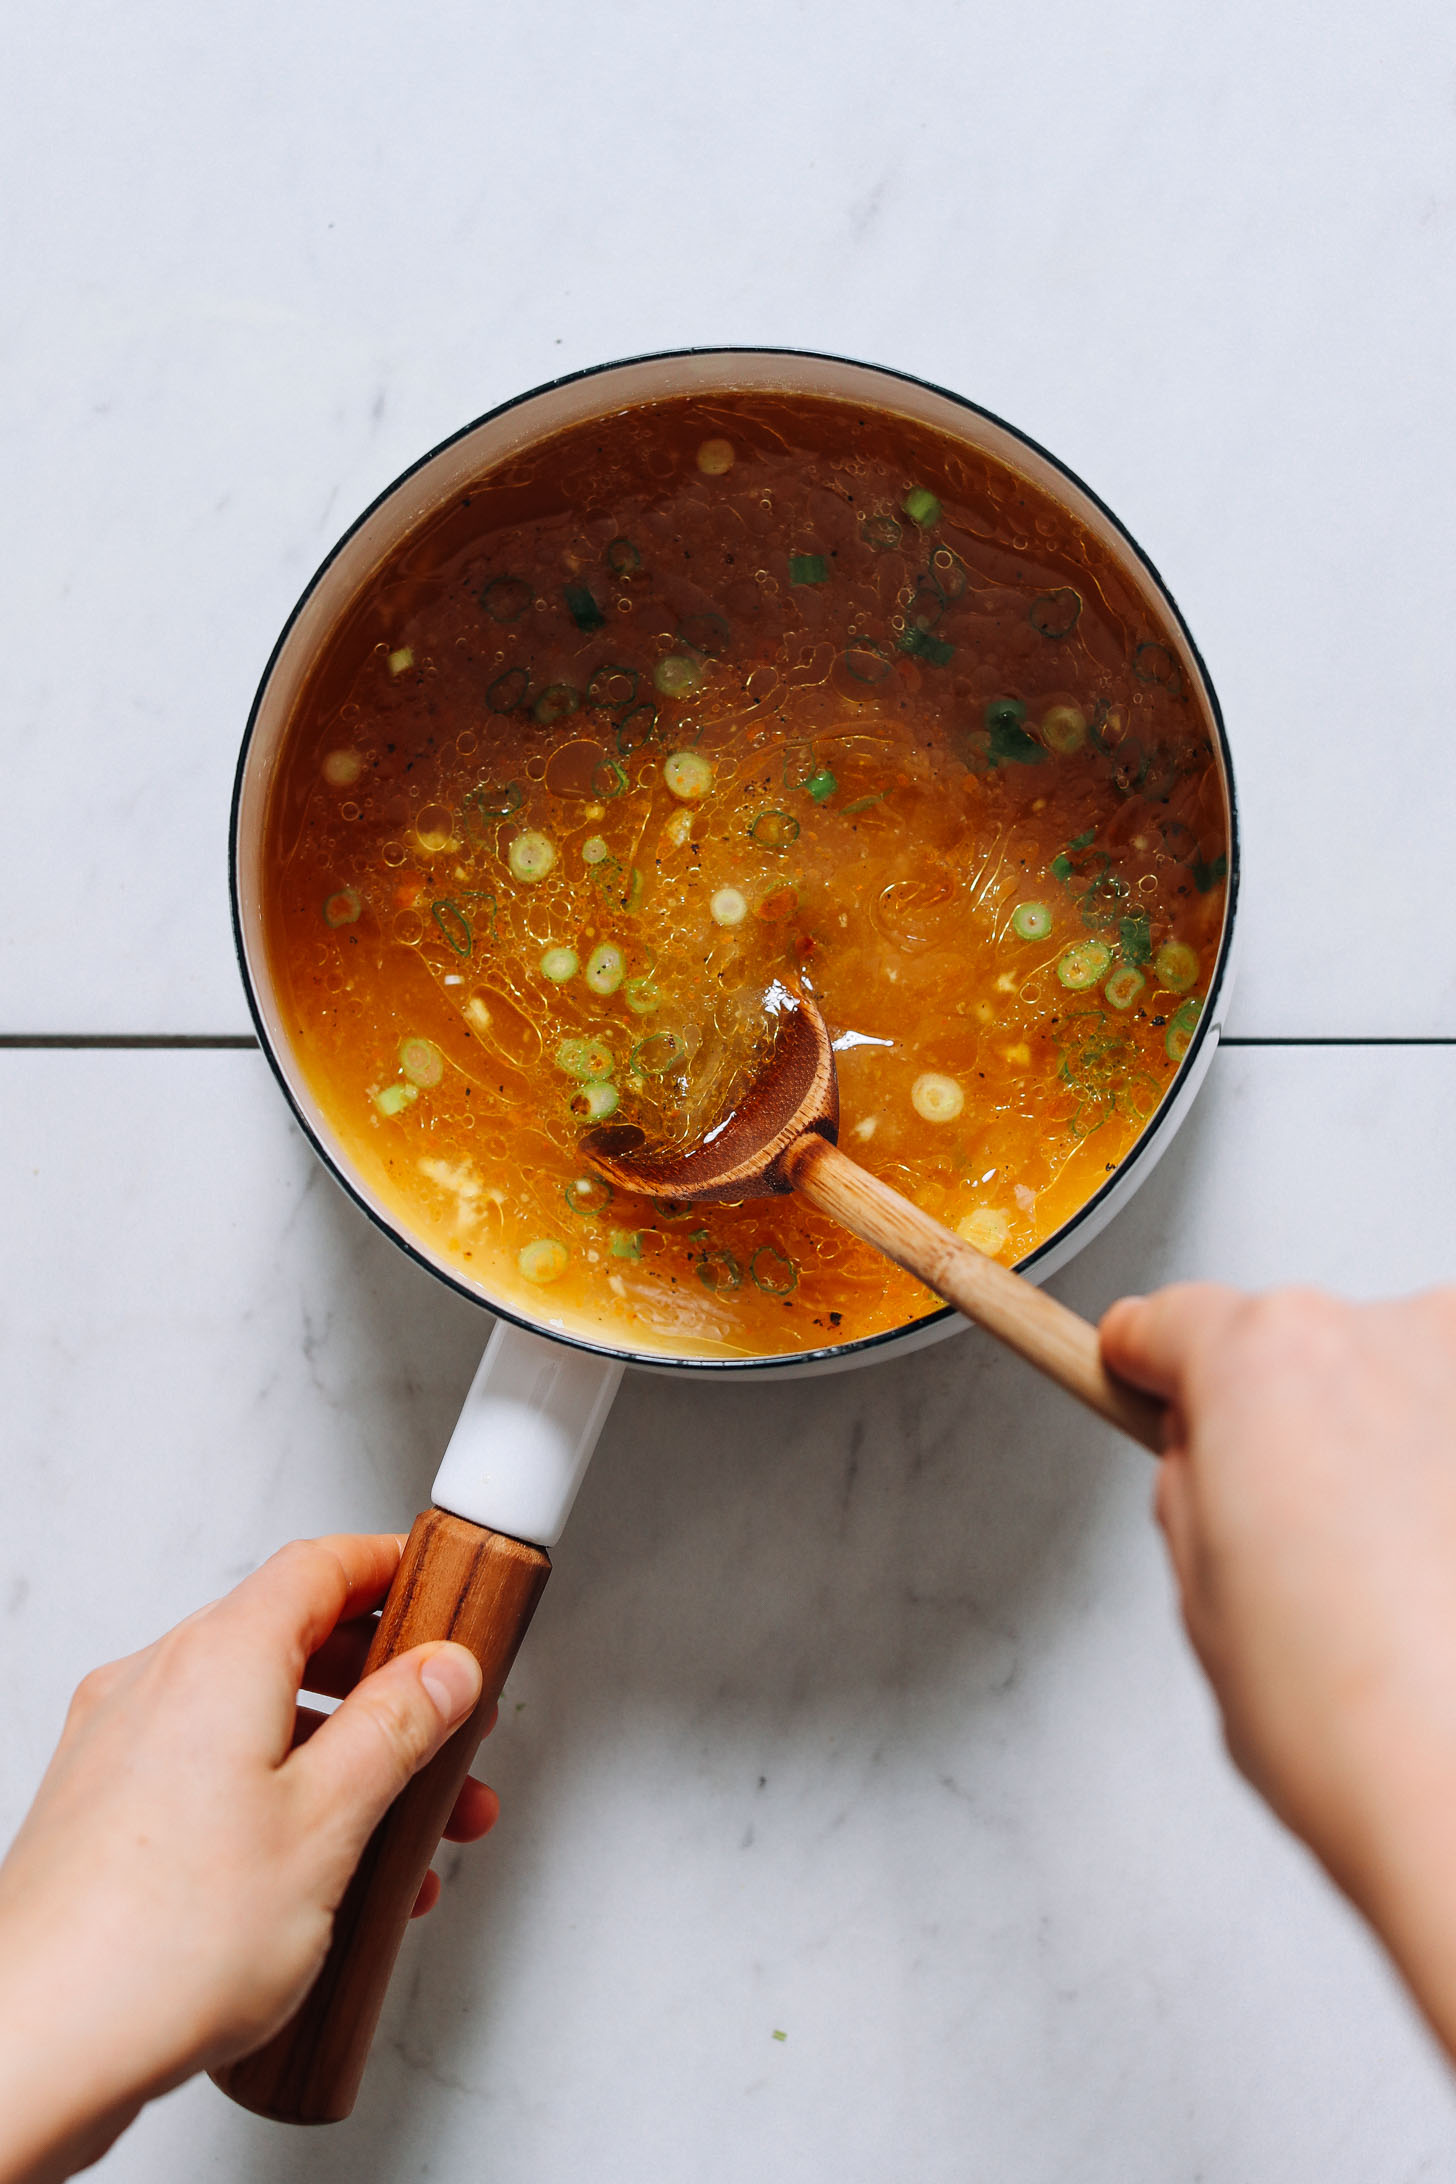 Using a wooden spoon to stir a pot of our Nourishing Bone Broth Tonic recipe